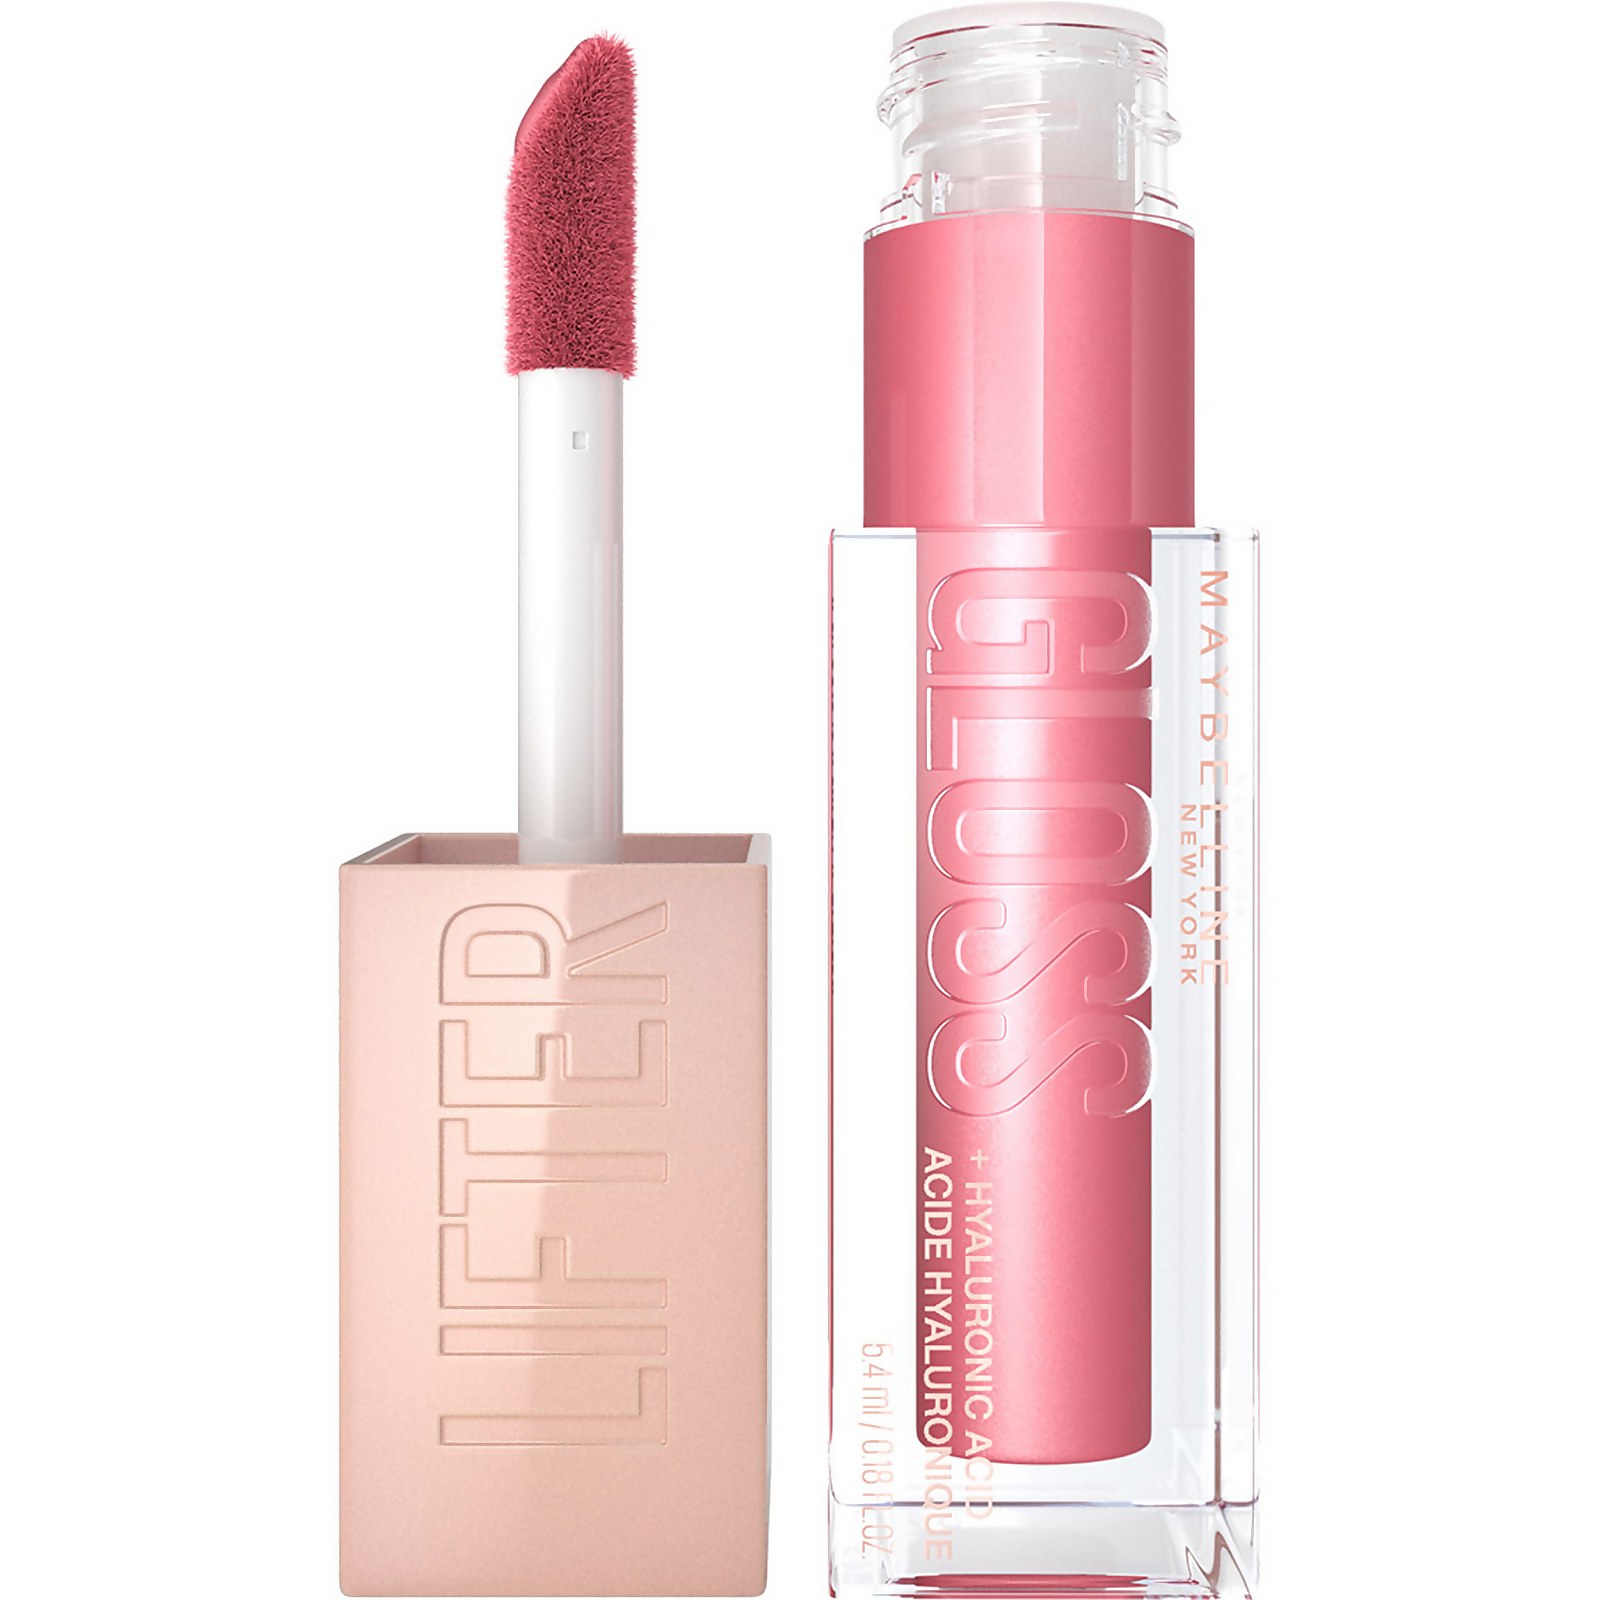 Image of Maybelline Lifter Gloss Hydrating Lip Gloss with Hyaluronic Acid 5g (Various Shades) - 005 Petal